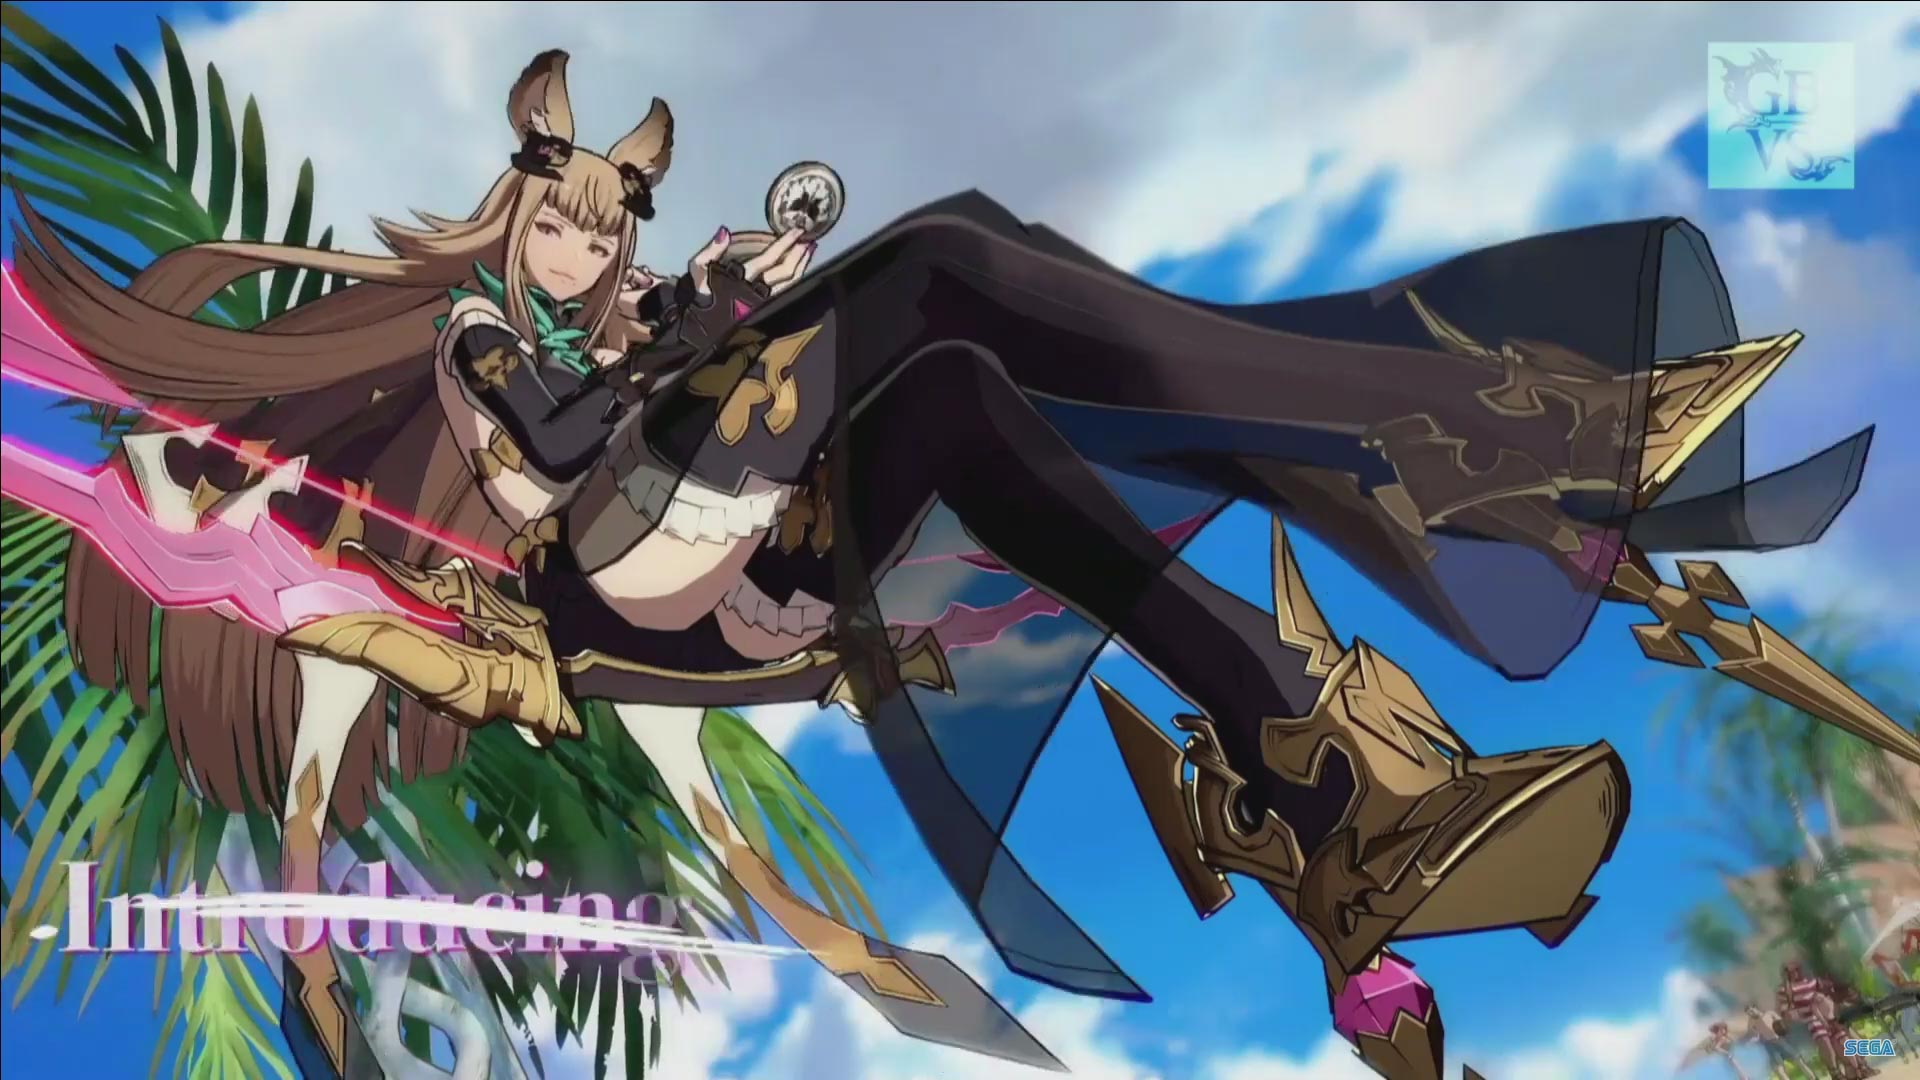 GranBlue Fantasy Versus Metera Reveal Image 2 out of 9 image gallery